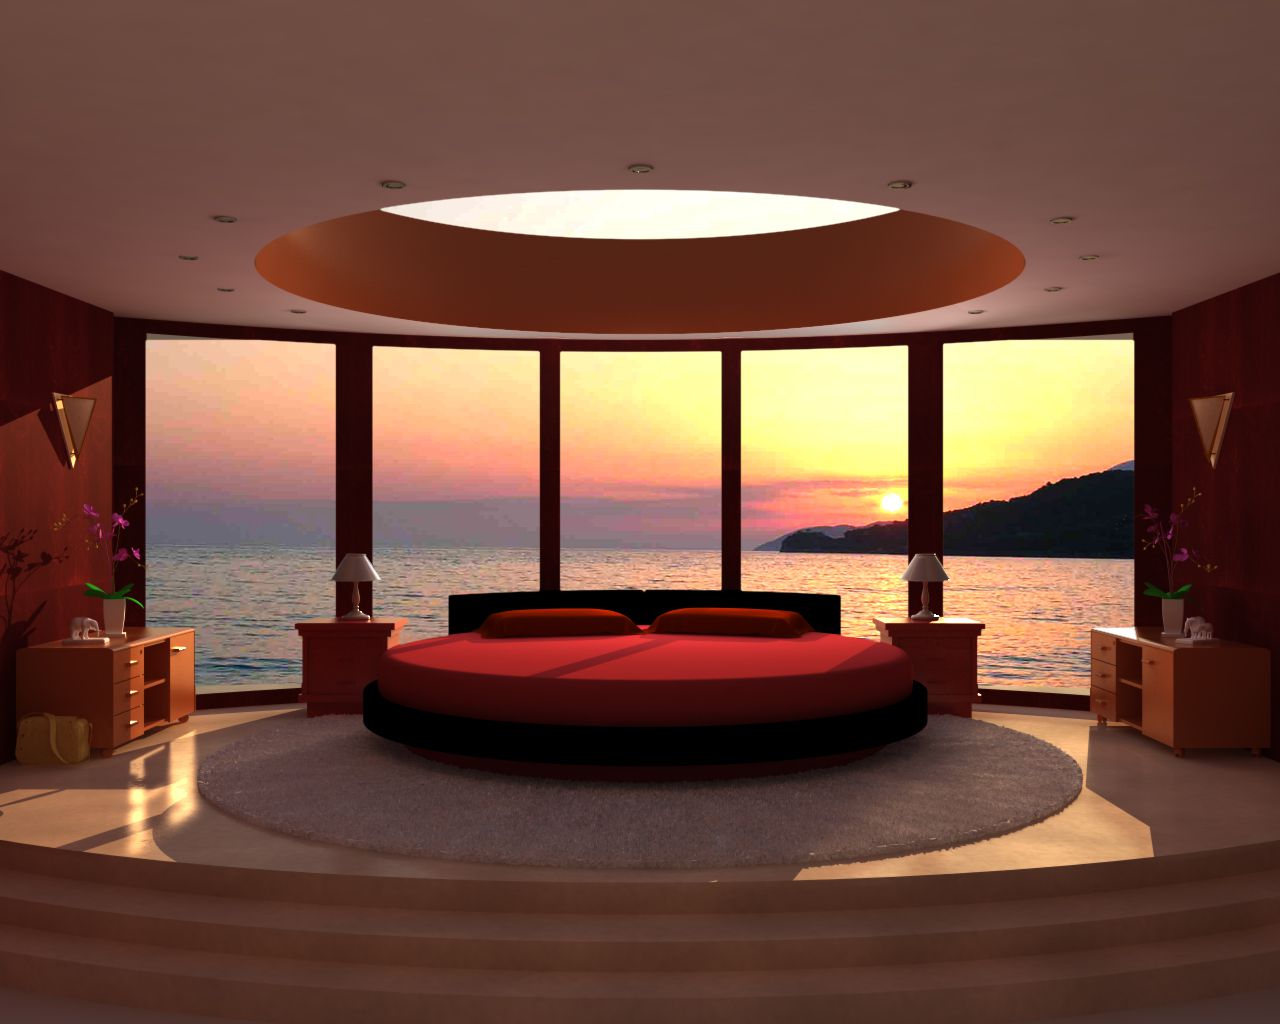 Circle Skylight Bedroom Winsome Circle Skylight For Unique Bedroom Ideas Apropos To Red And Black Bed Design Bedroom Unique Bedroom Ideas Preserving The Cozy Vibe In Style